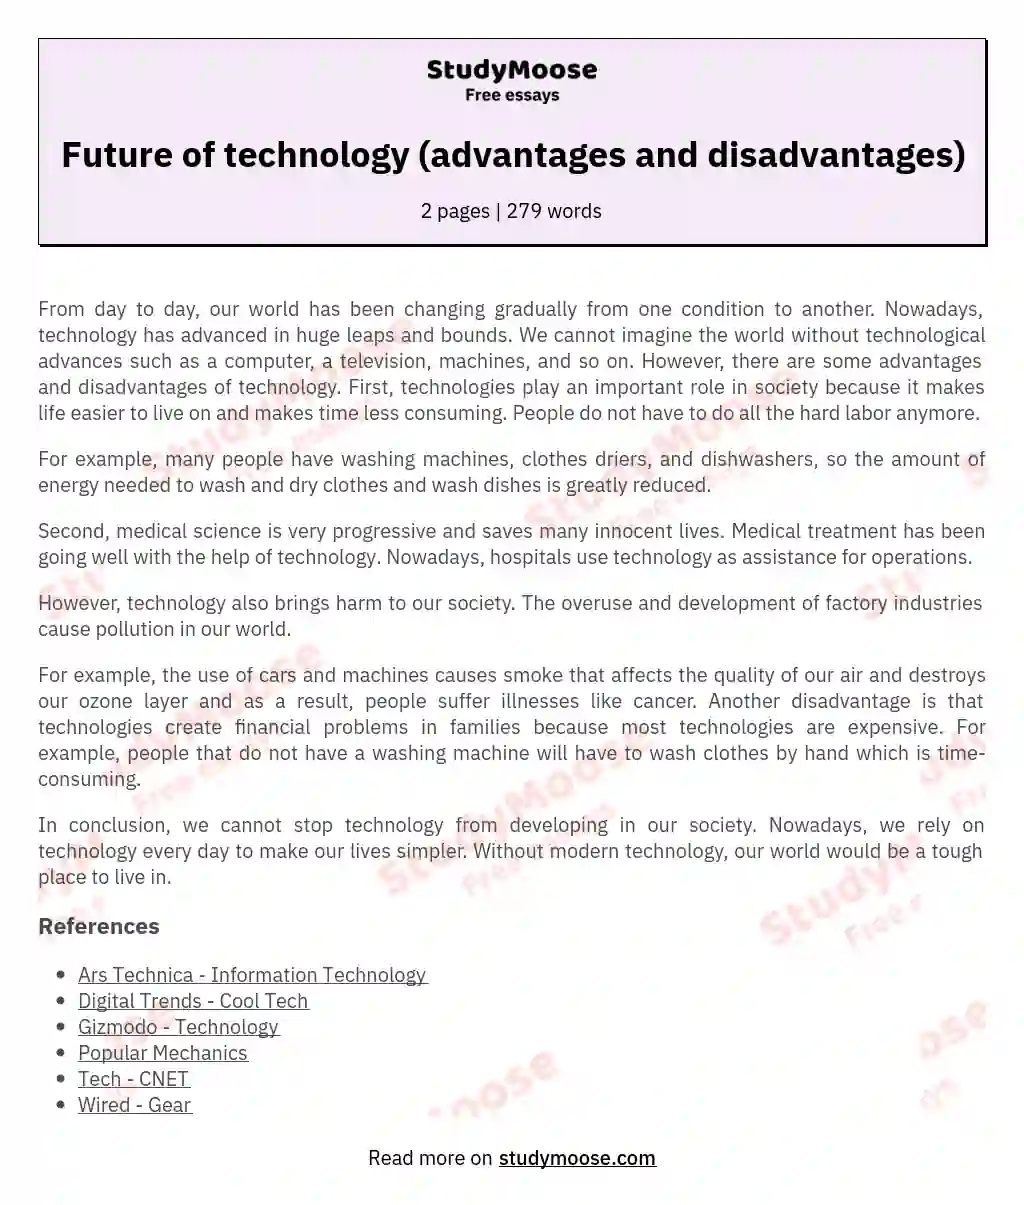 Future of technology (advantages and disadvantages)